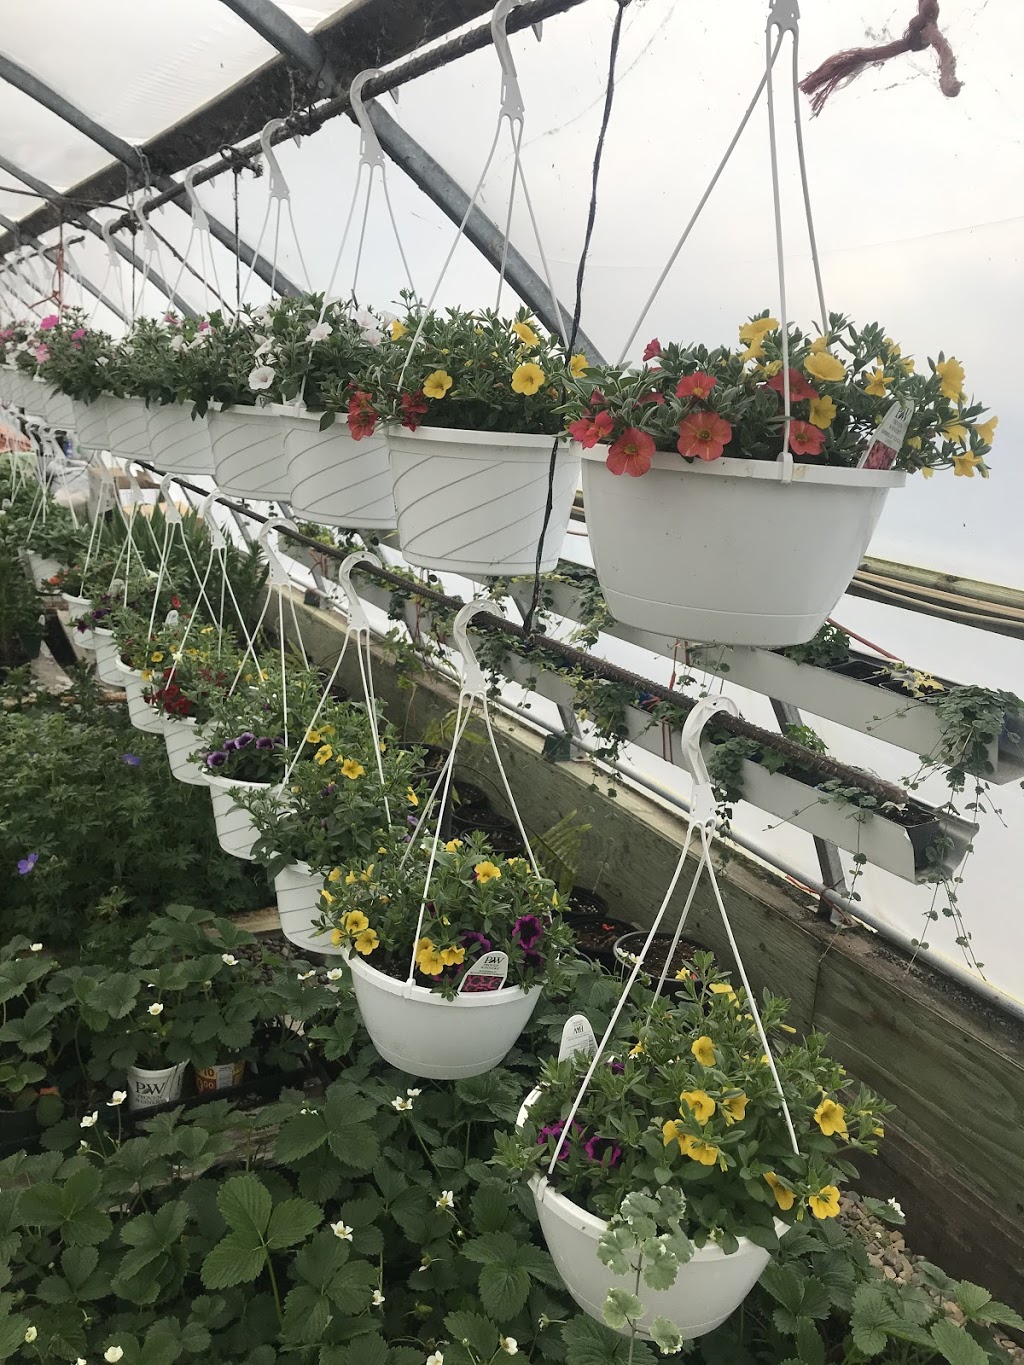 Tammys Green Thumb Greenhouse | 4530 70 Ave #3510, Olds, AB T4H 1T8, Canada | Phone: (403) 556-6740